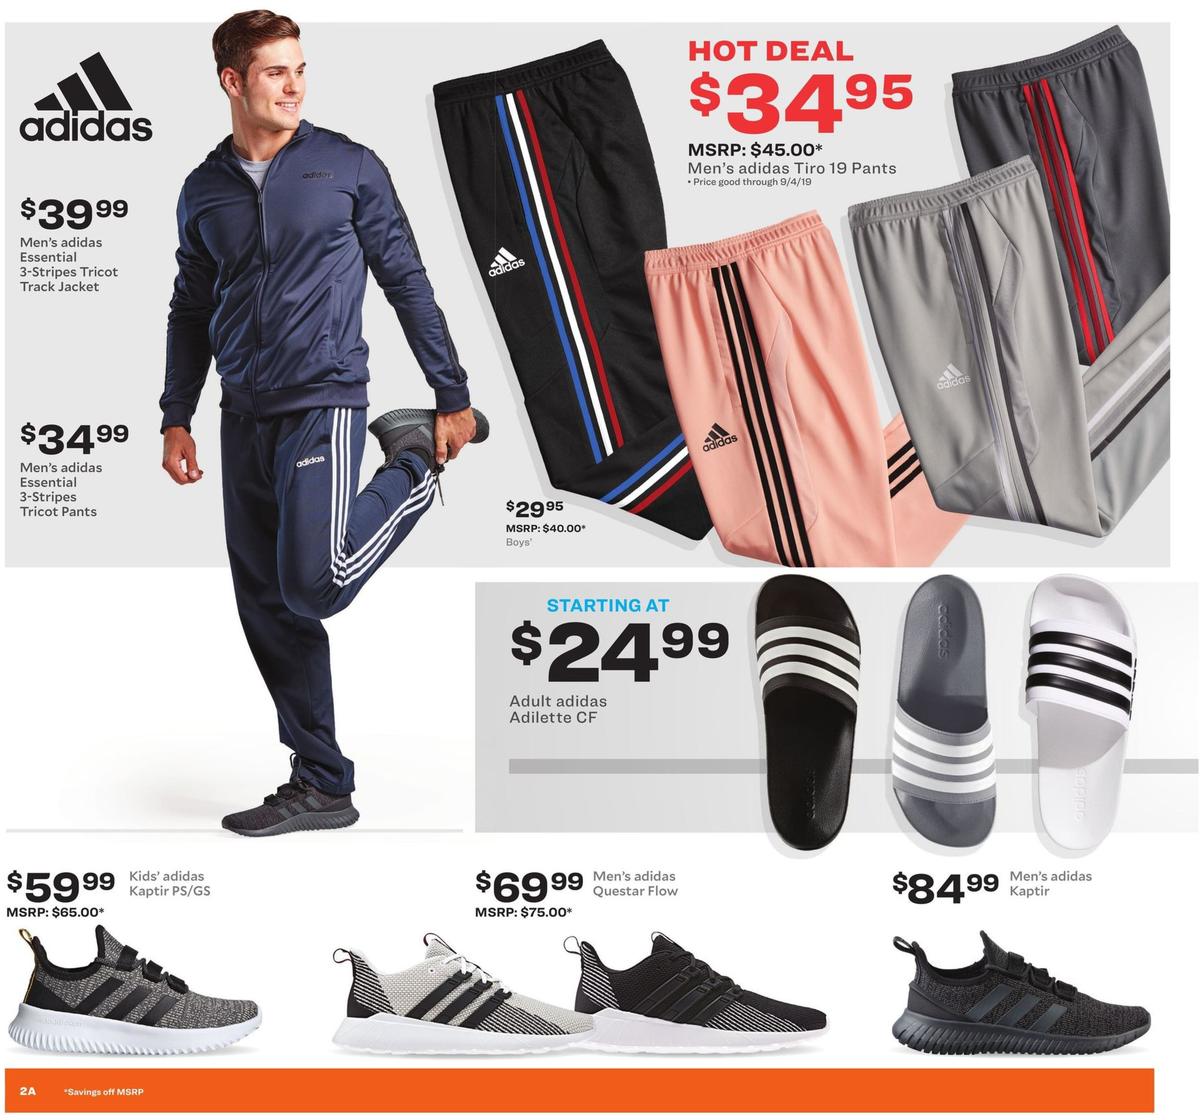 Academy Sports + Outdoors Weekly Ad from September 1